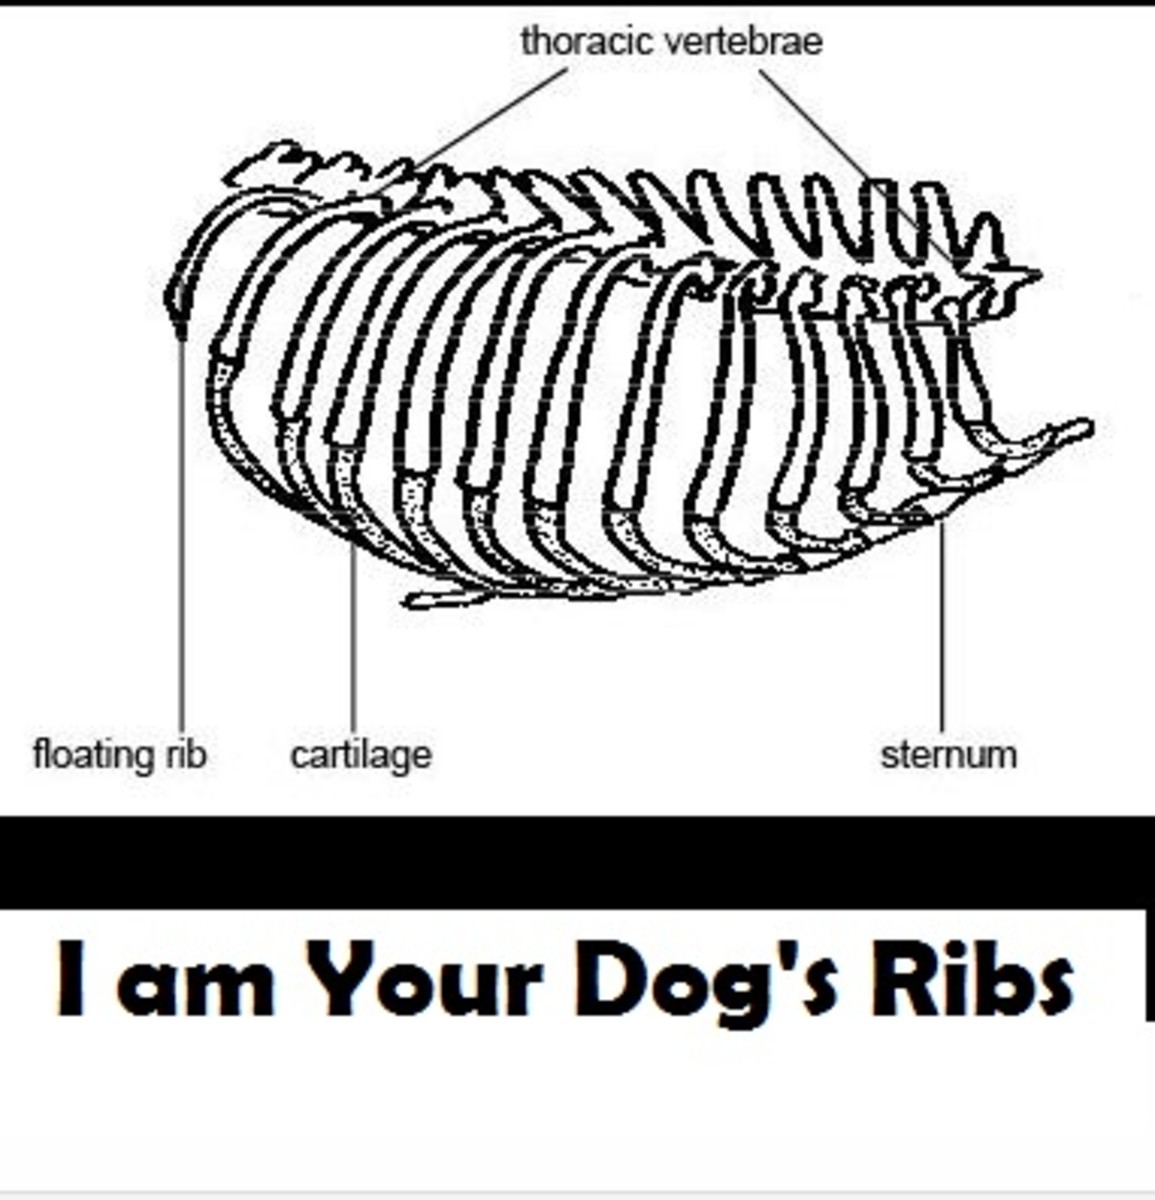 I am Your Dog's Ribs - Dog Discoveries